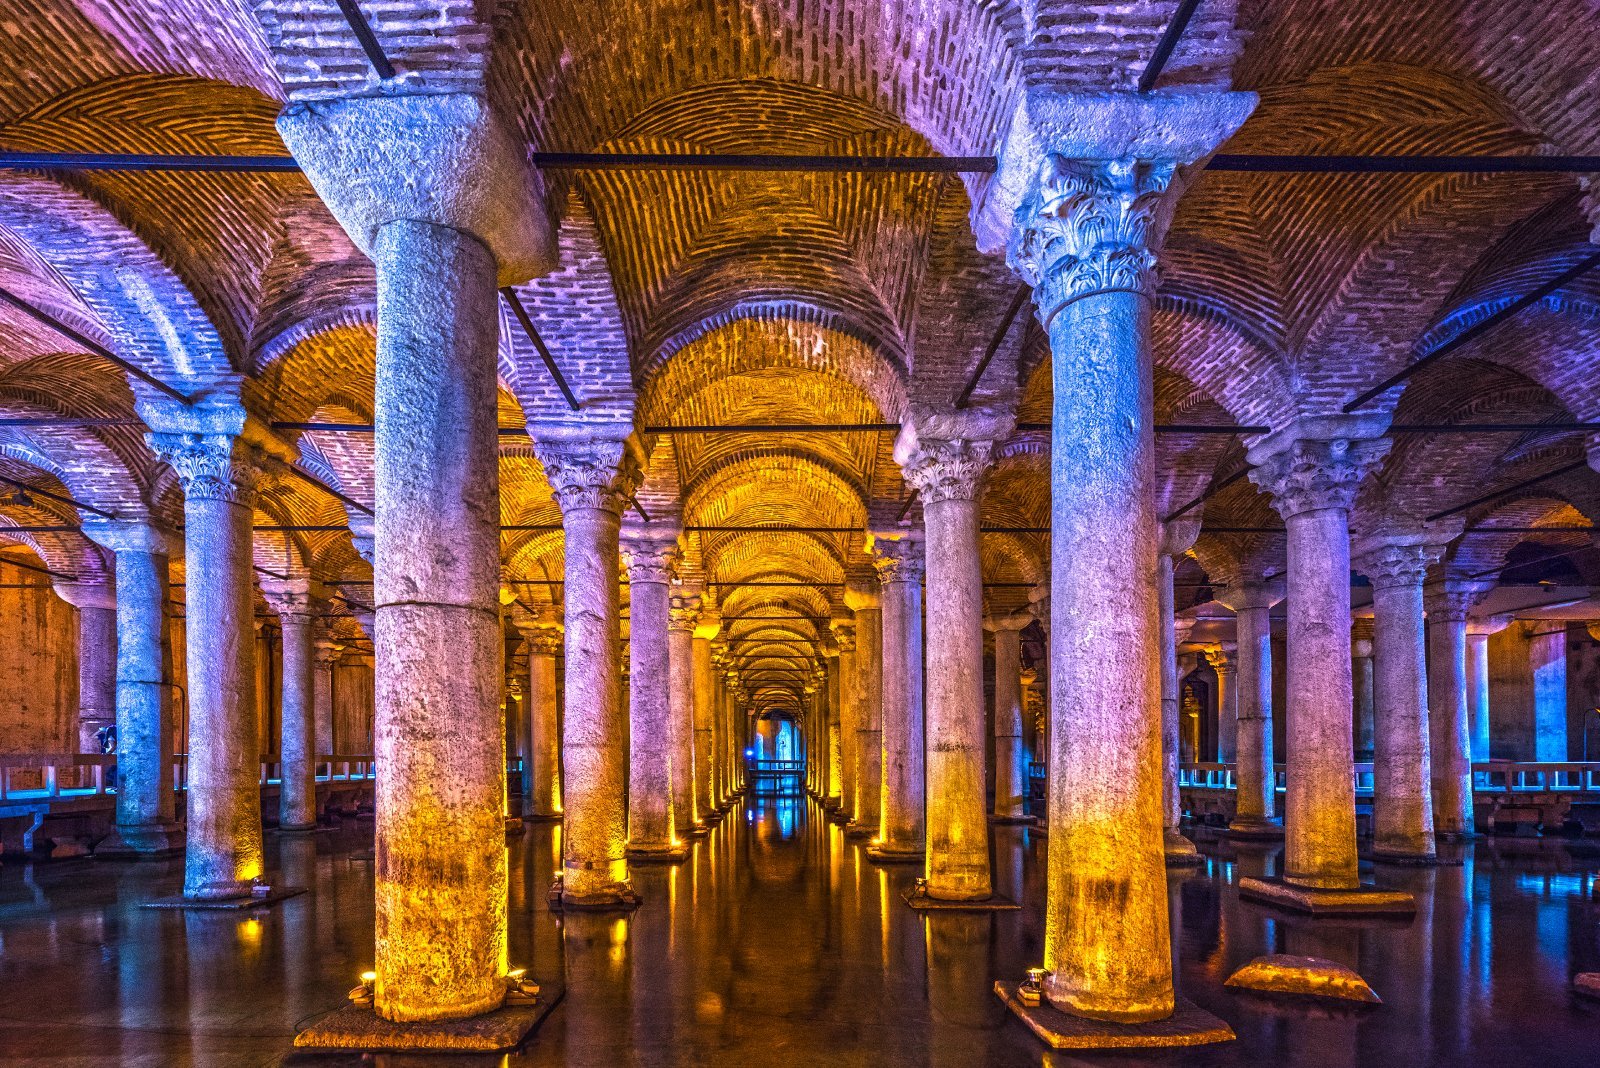 <p class="wp-caption-text">Image Credit: Shutterstock / Luciano Mortula – LGM</p>  <p><span>The Basilica Cistern, the largest of several hundred ancient cisterns beneath the city, offers a glimpse into the ingenuity of Byzantine engineering. Built-in the 6th century to supply water to the Great Palace, it now stands as a hauntingly beautiful attraction, with its dimly lit corridors and the sound of dripping water echoing off its vaulted ceilings. The cistern’s Medusa head columns are particularly noteworthy, adding a touch of mystery to the already atmospheric setting.</span></p>